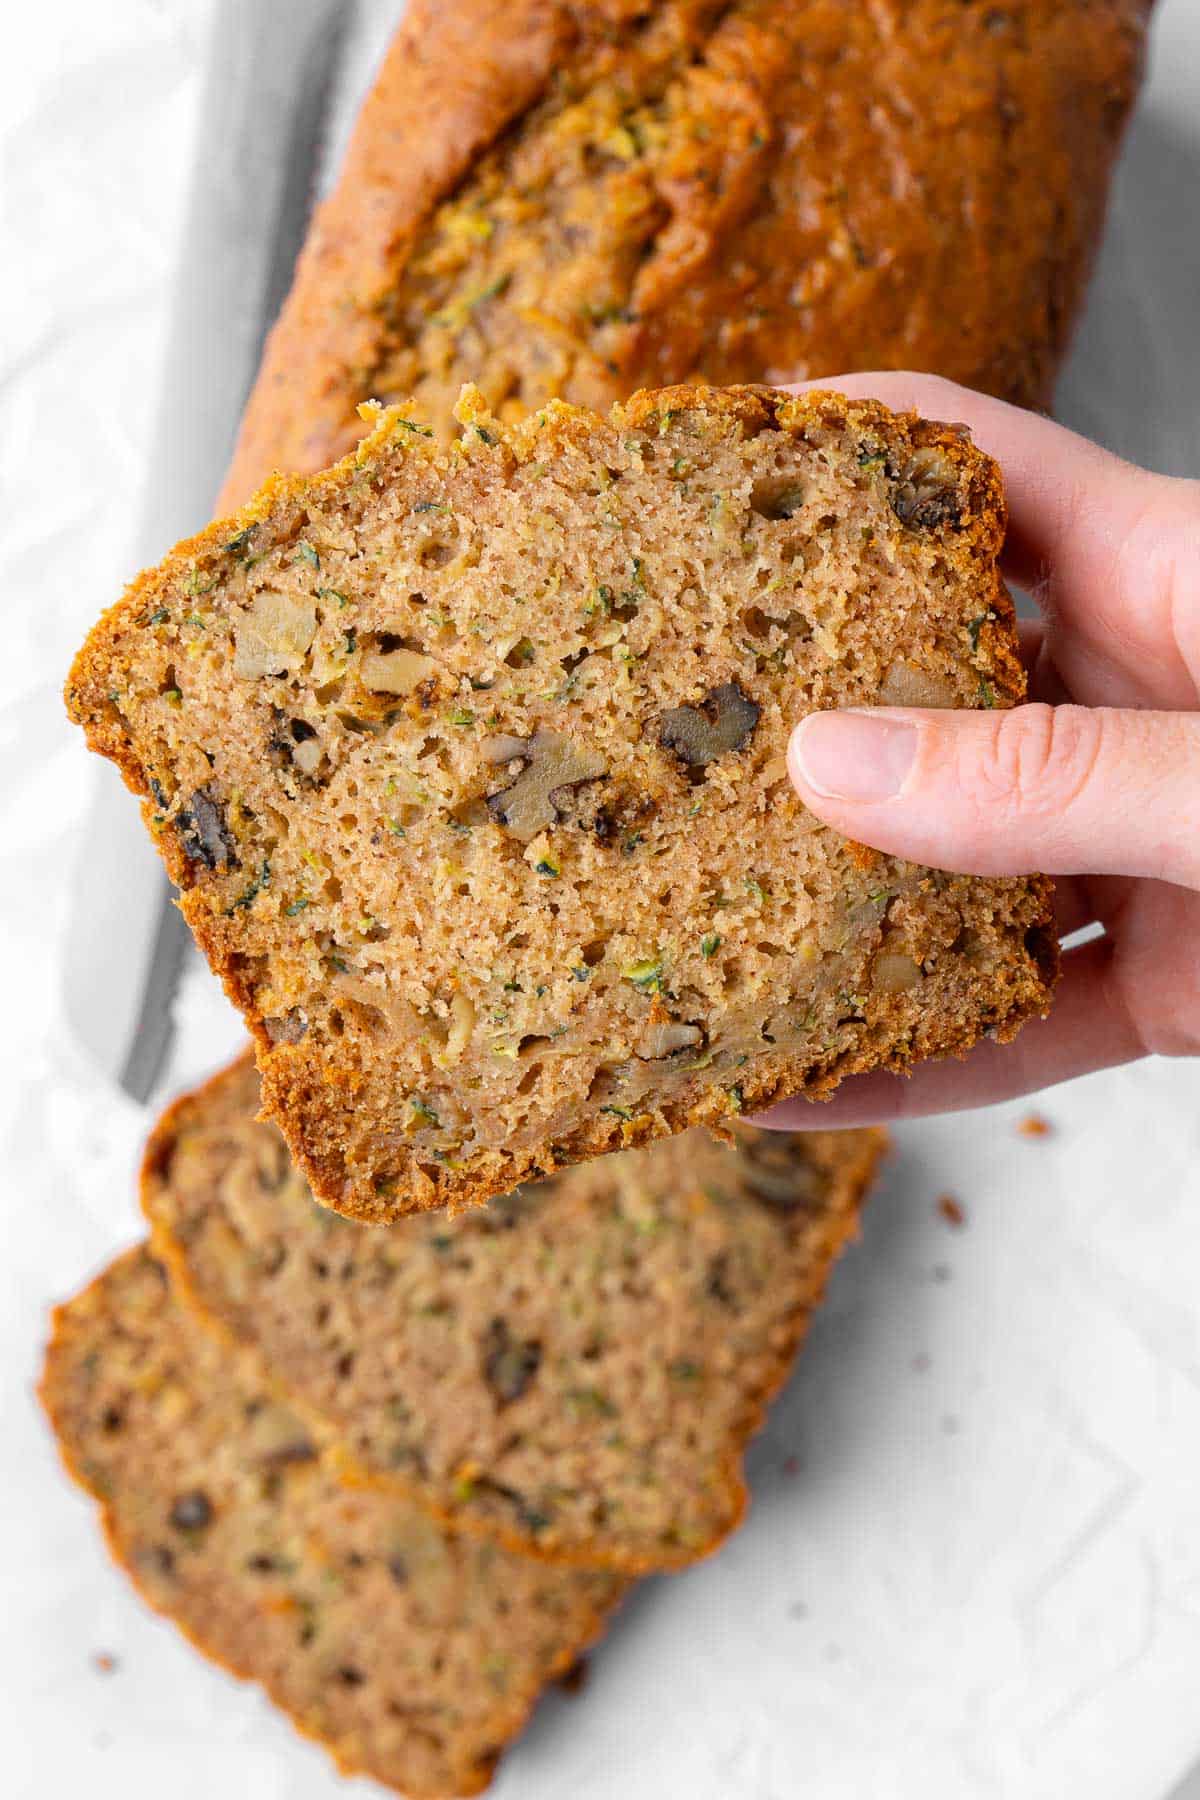 Hand holding a slice of zucchini bread up close to show texture.